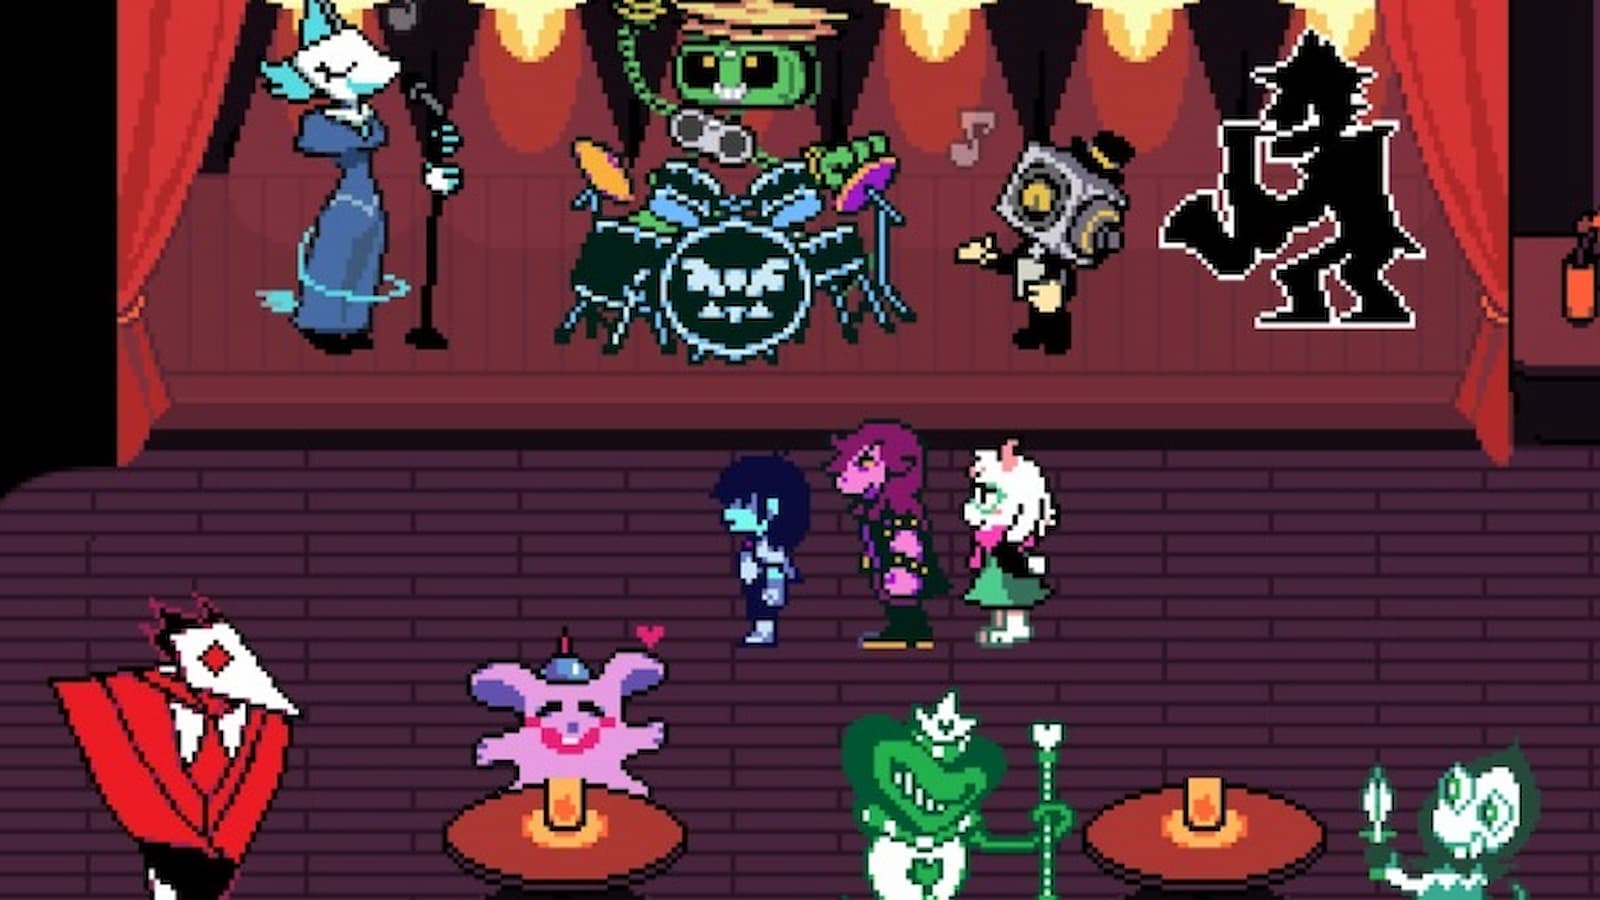 Deltarune release strategy altered, will be available to purchase